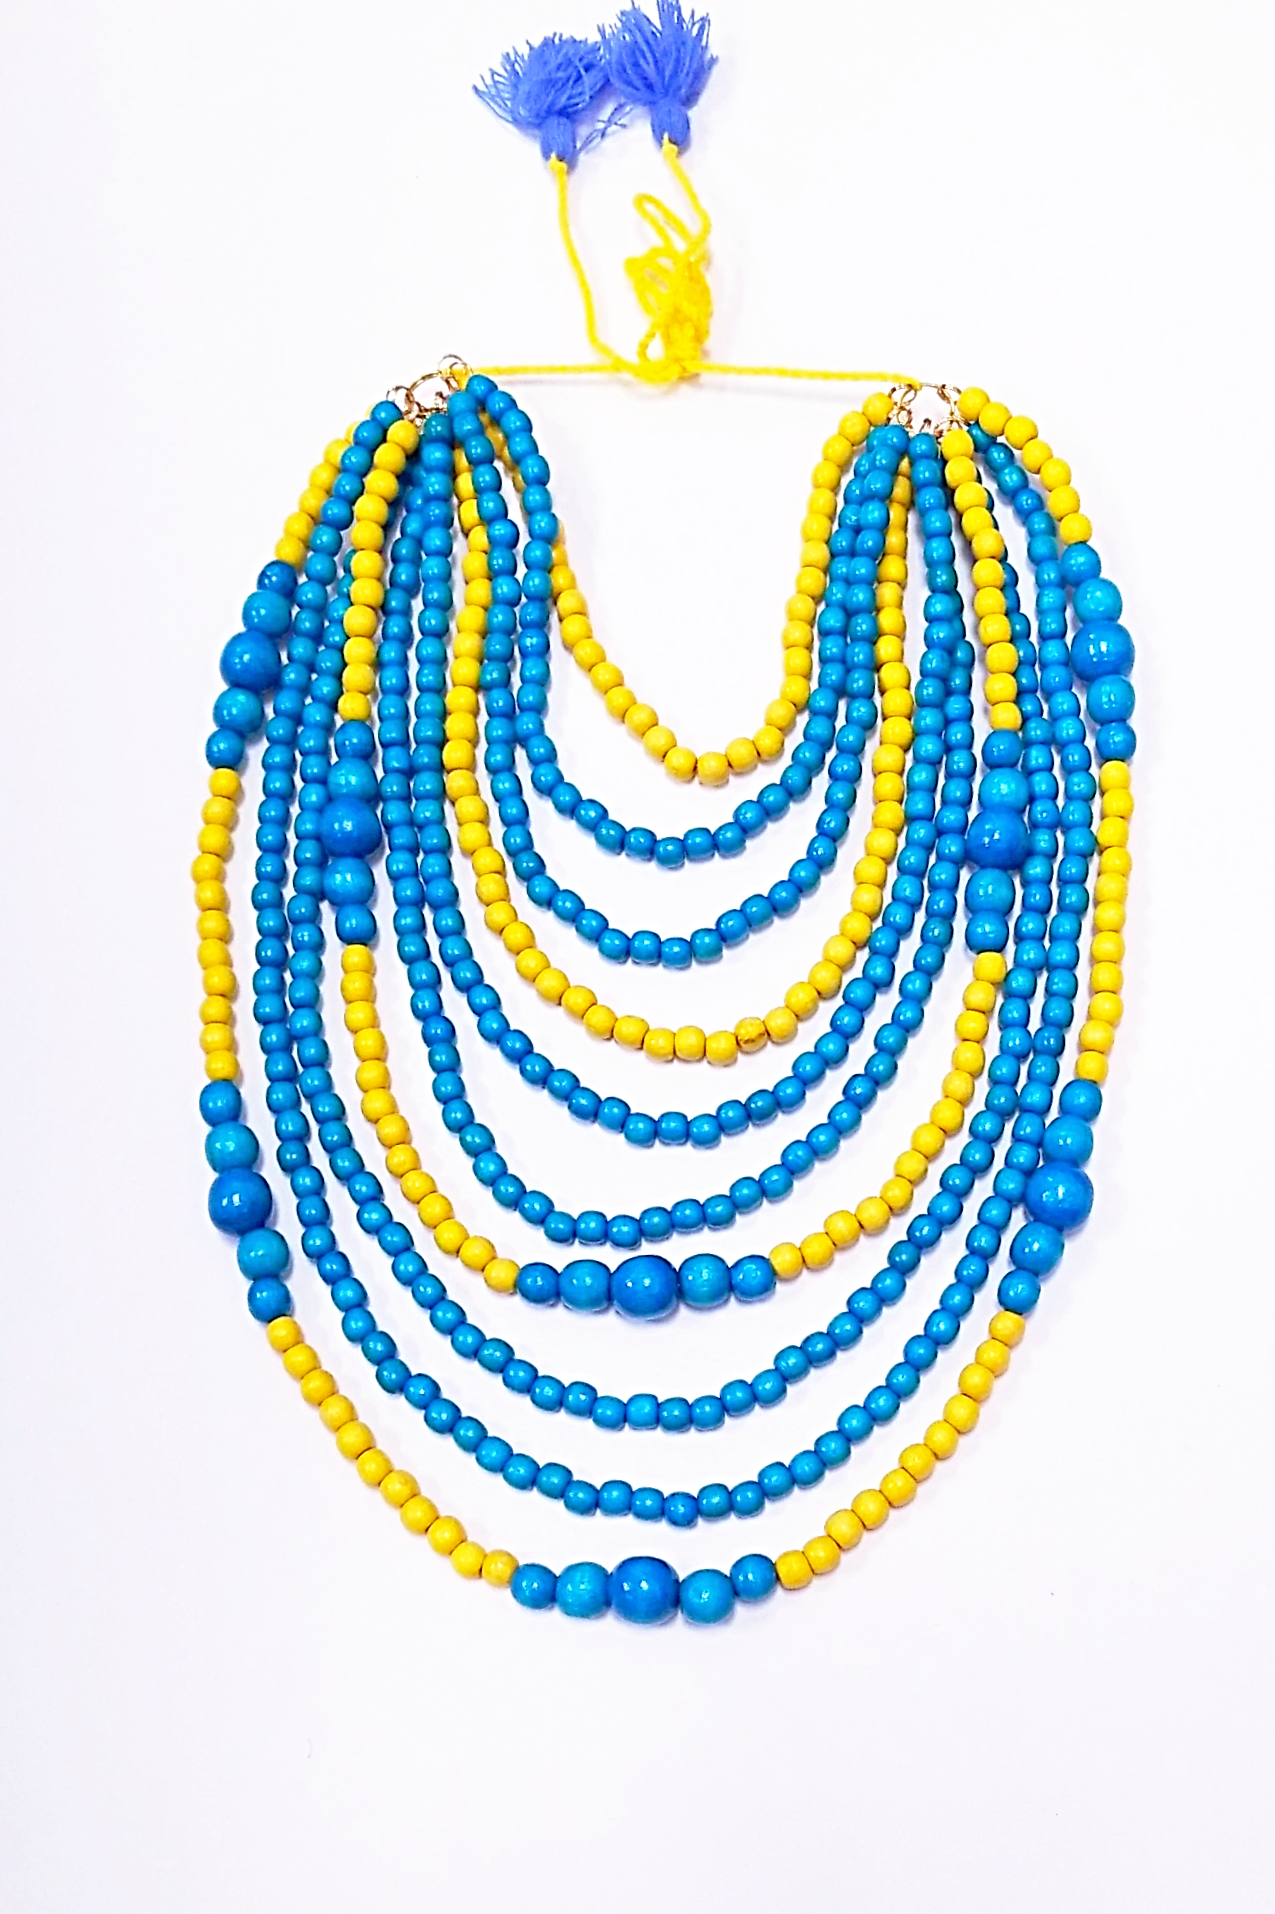 Artisan crafted wooden bead 10-strand necklace. Blue and yellow